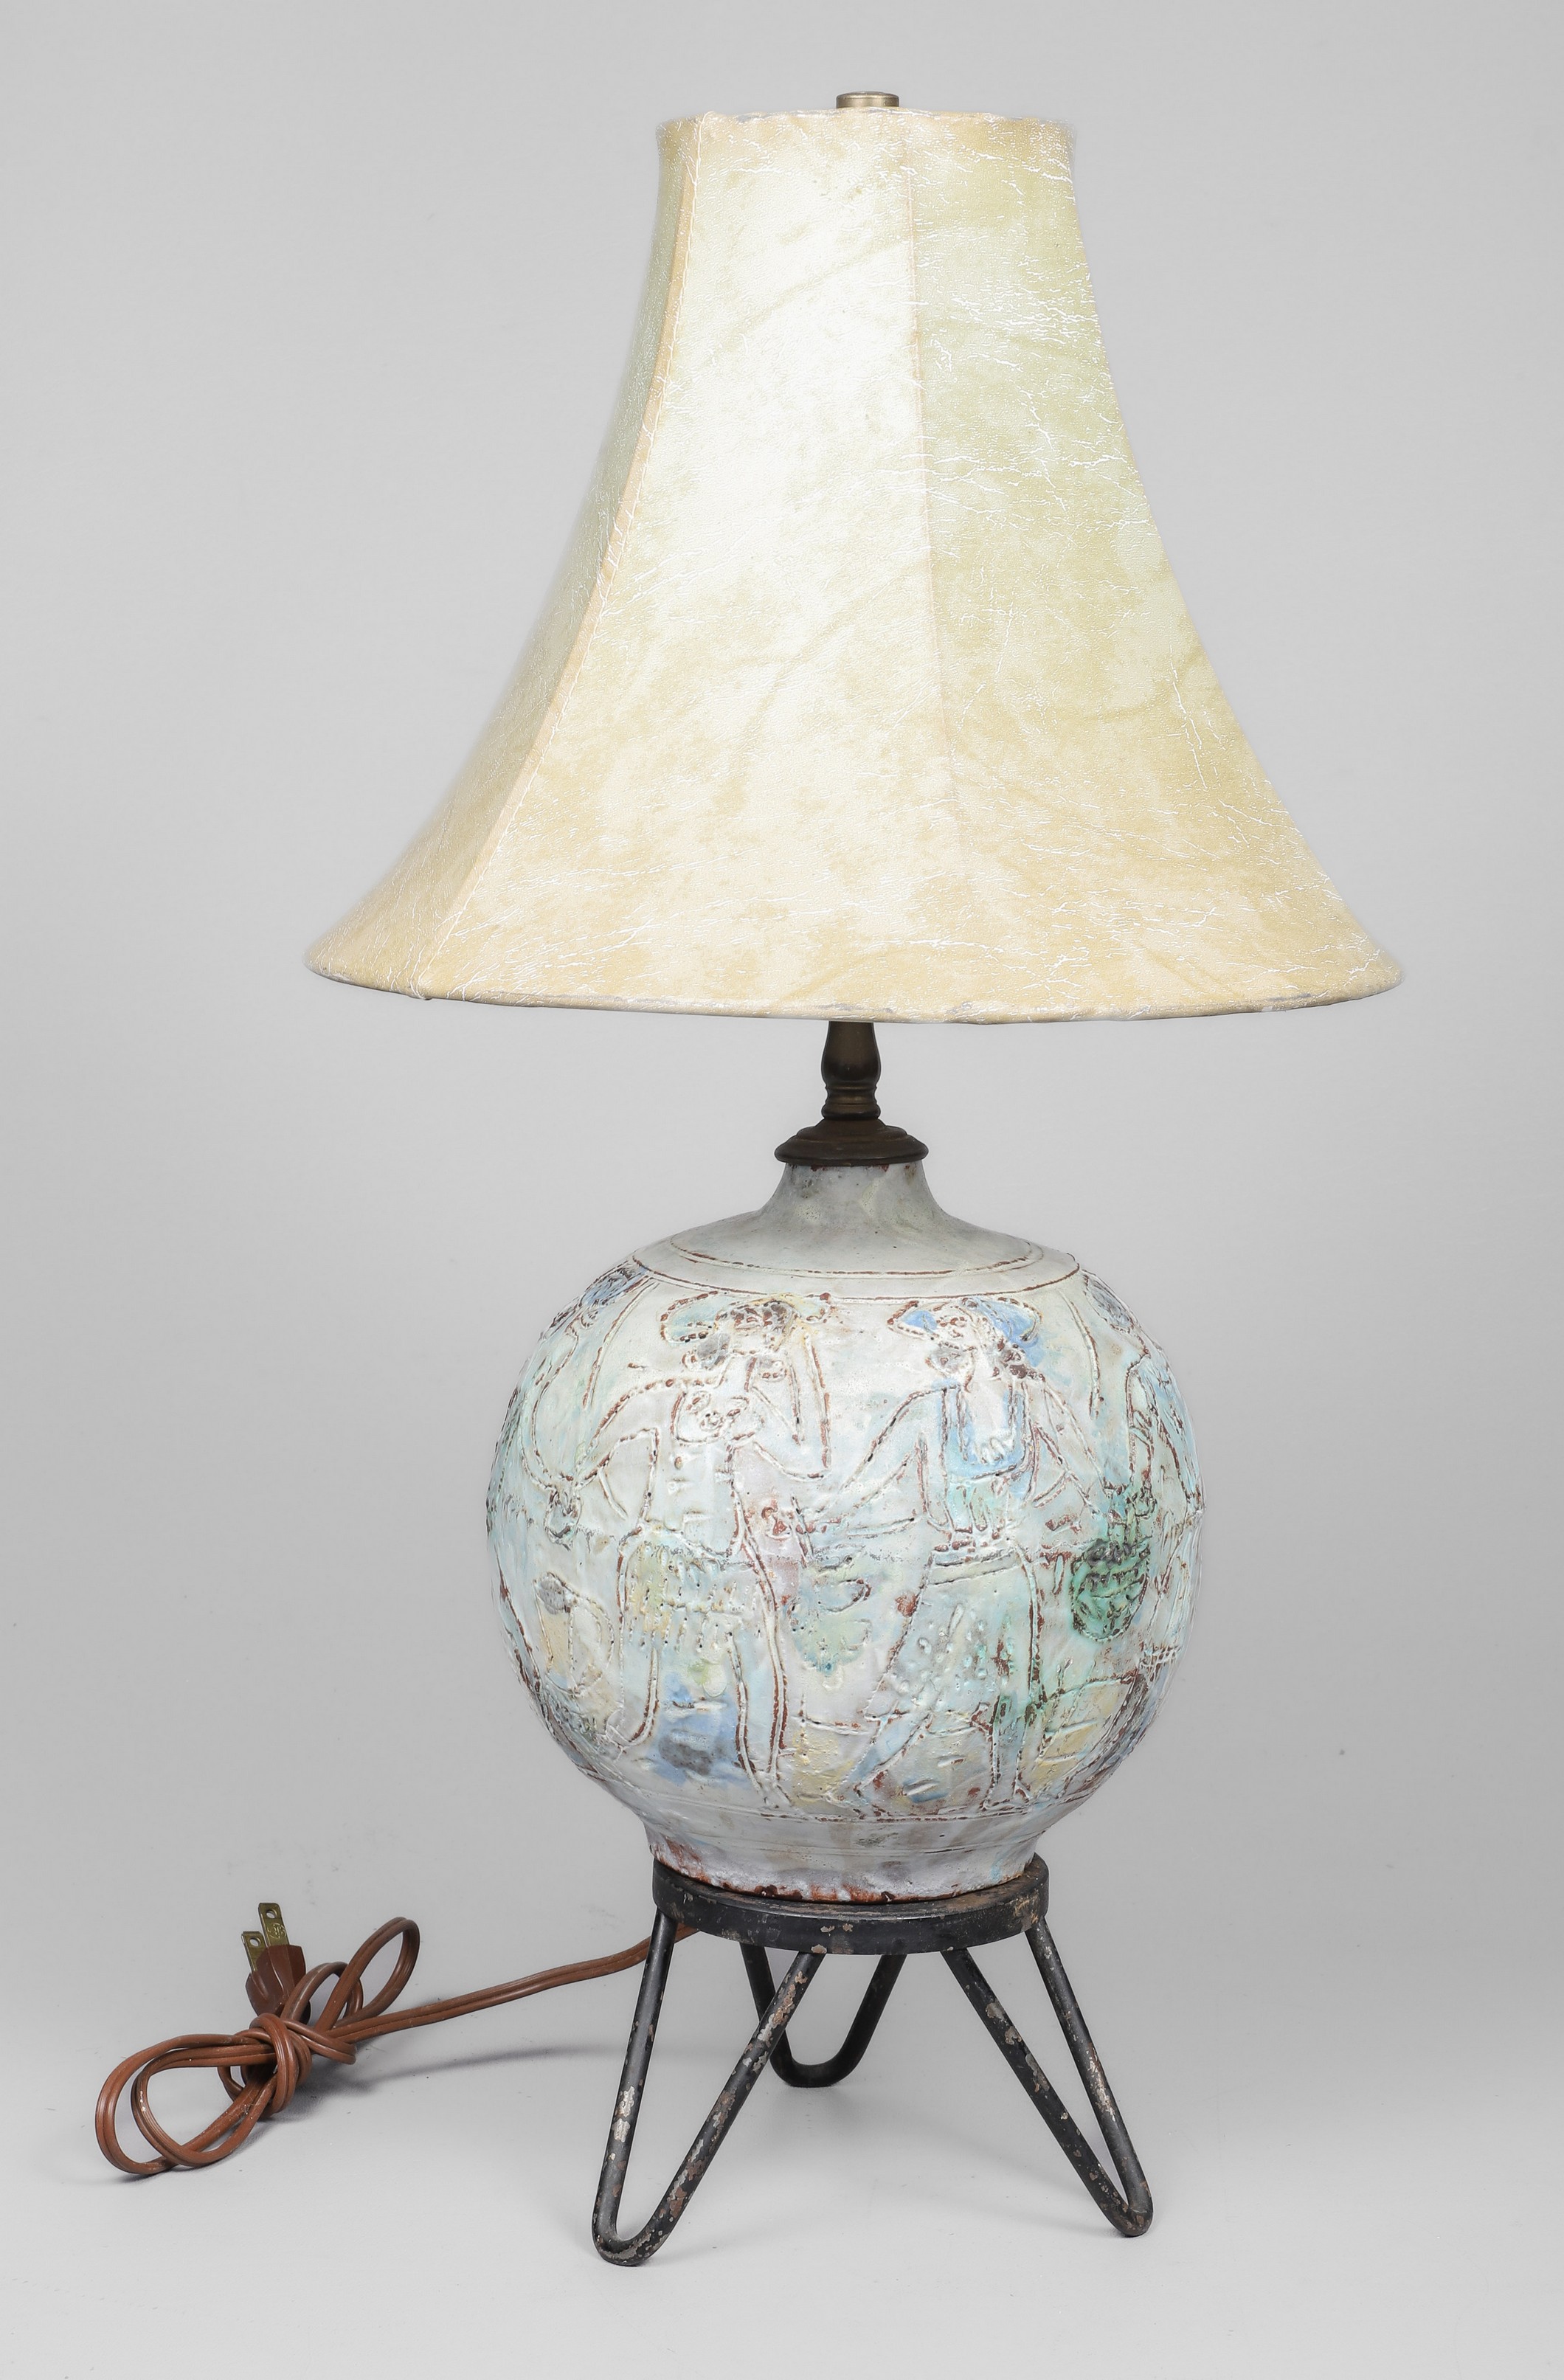 Art pottery table lamp, incised